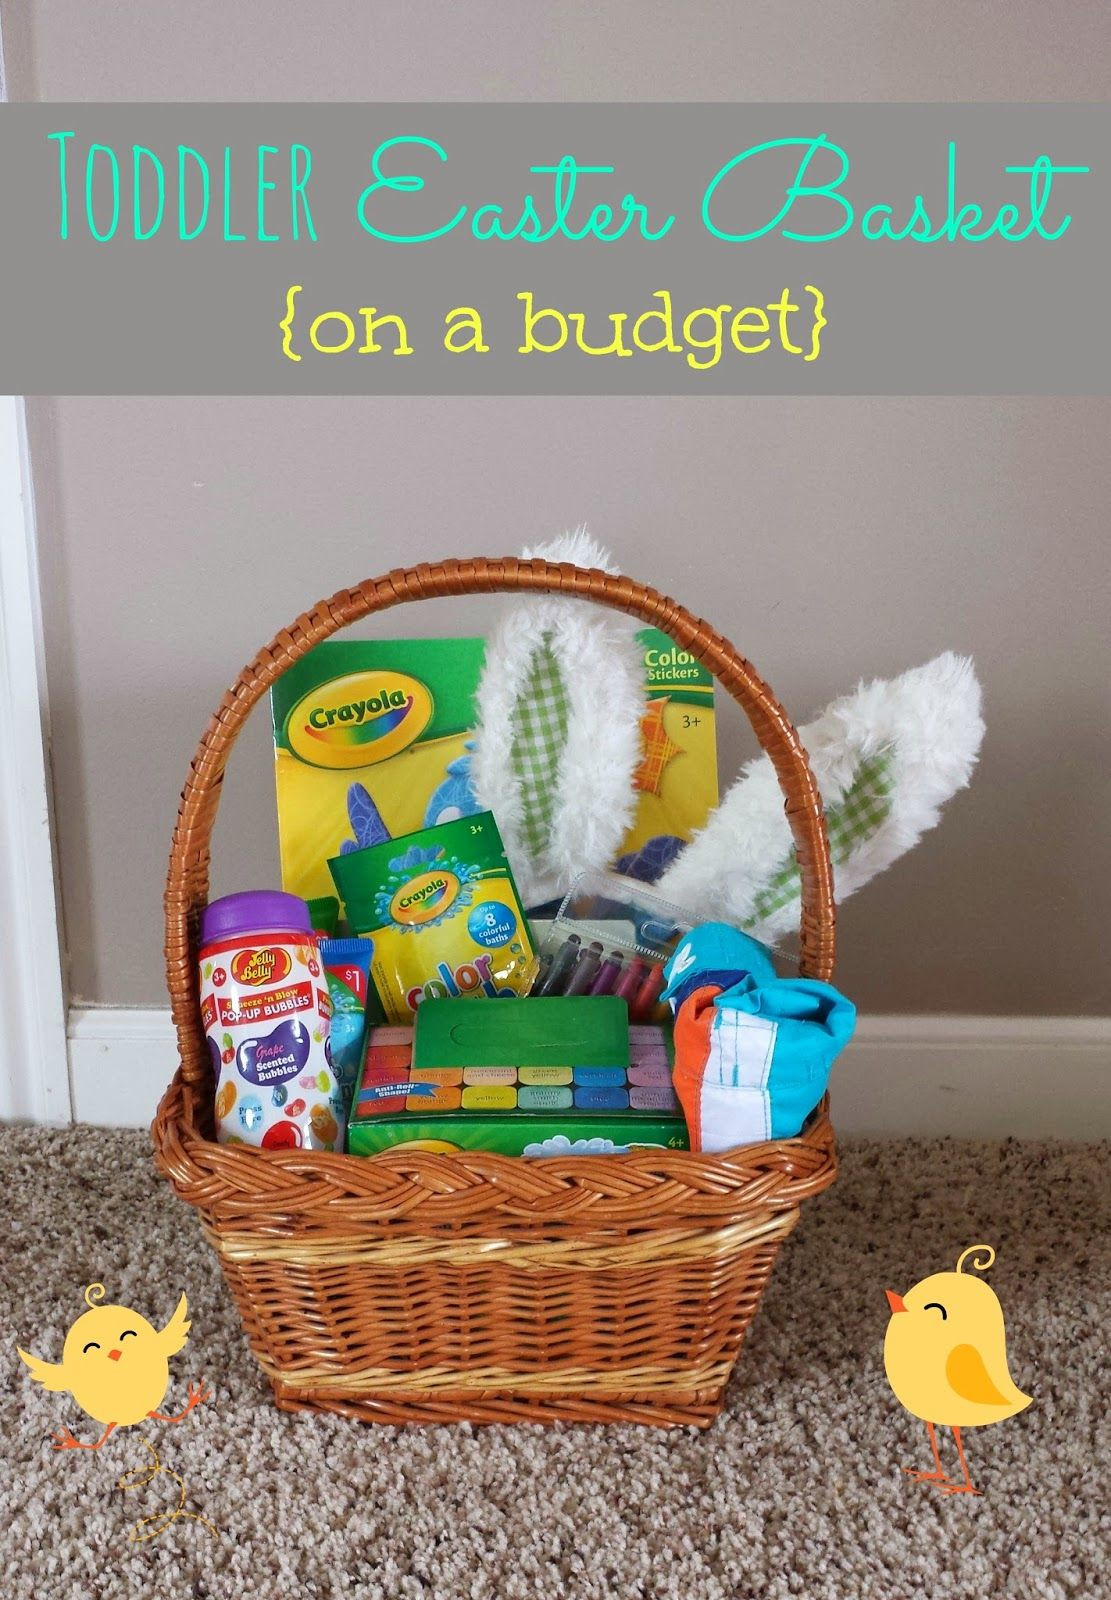 Baby Easter Baskets Ideas
 Last year I did a post with ideas for Baby s First Easter